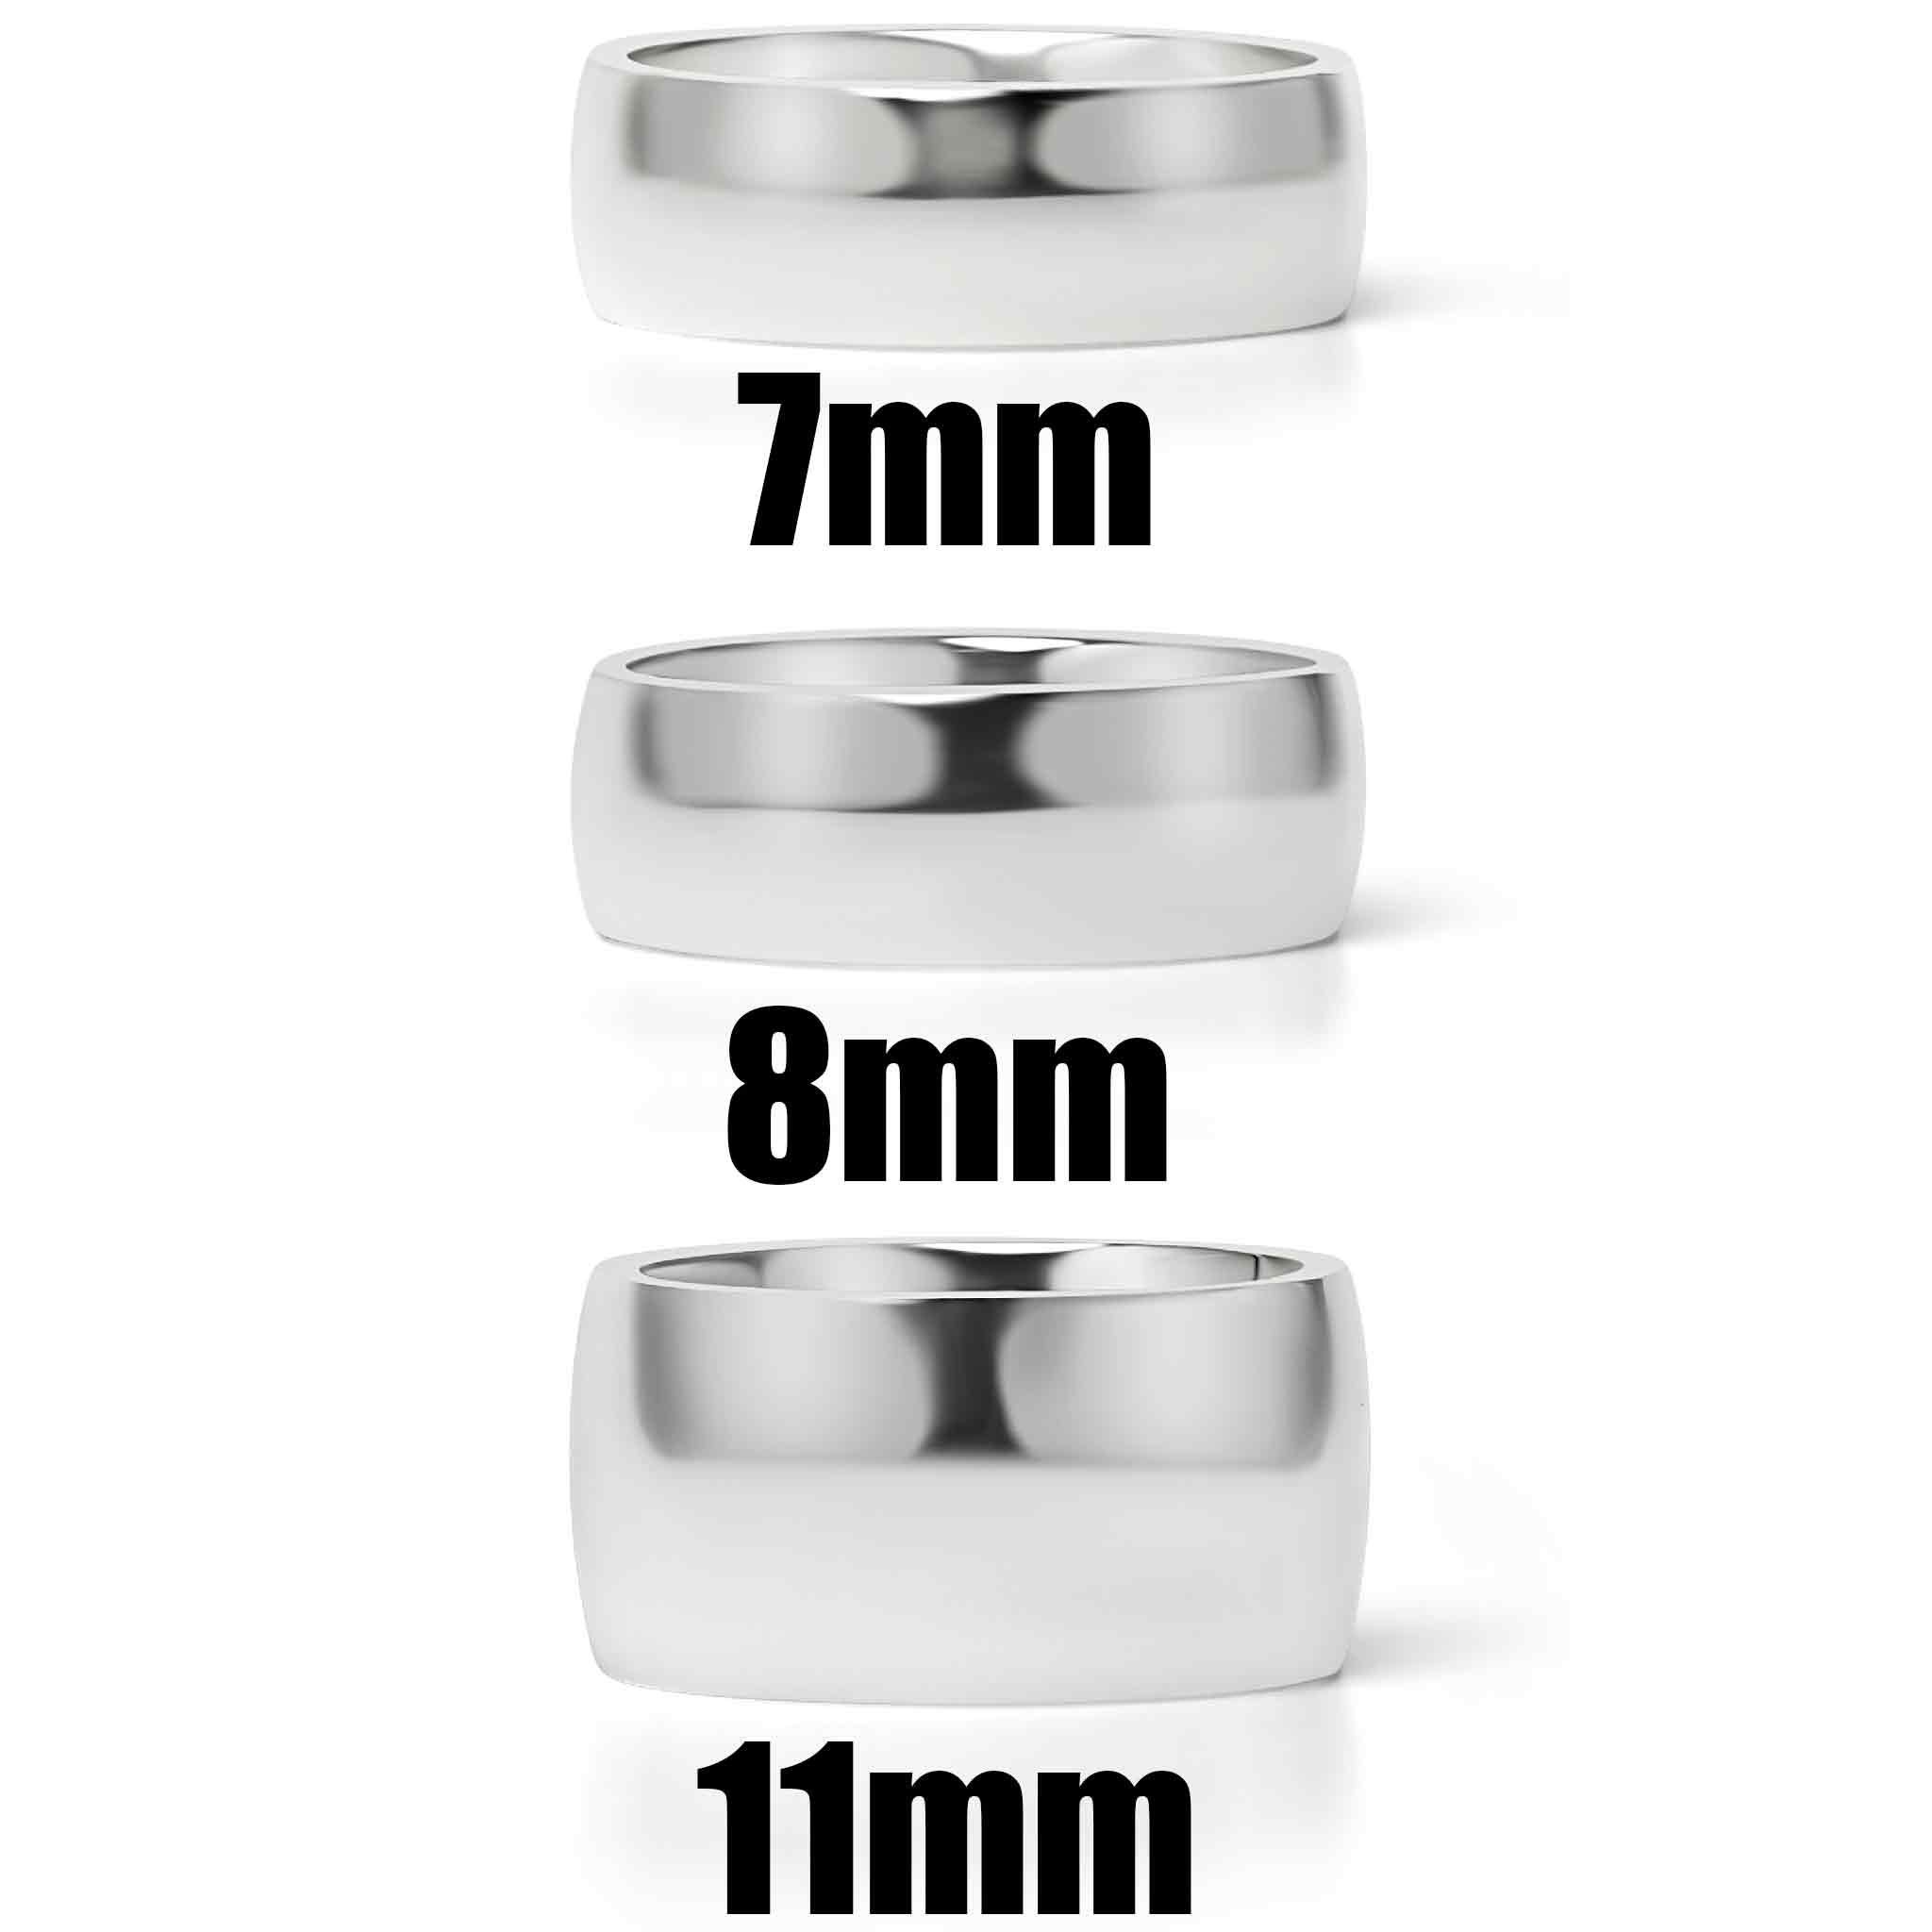 Highly Polished Stainless Steel Blank Ring - Versatile Classic Style, 7mm-11mm Widths, Durable 316L Surgical Steel - Jewelry & Watches - Bijou Her -  -  - 